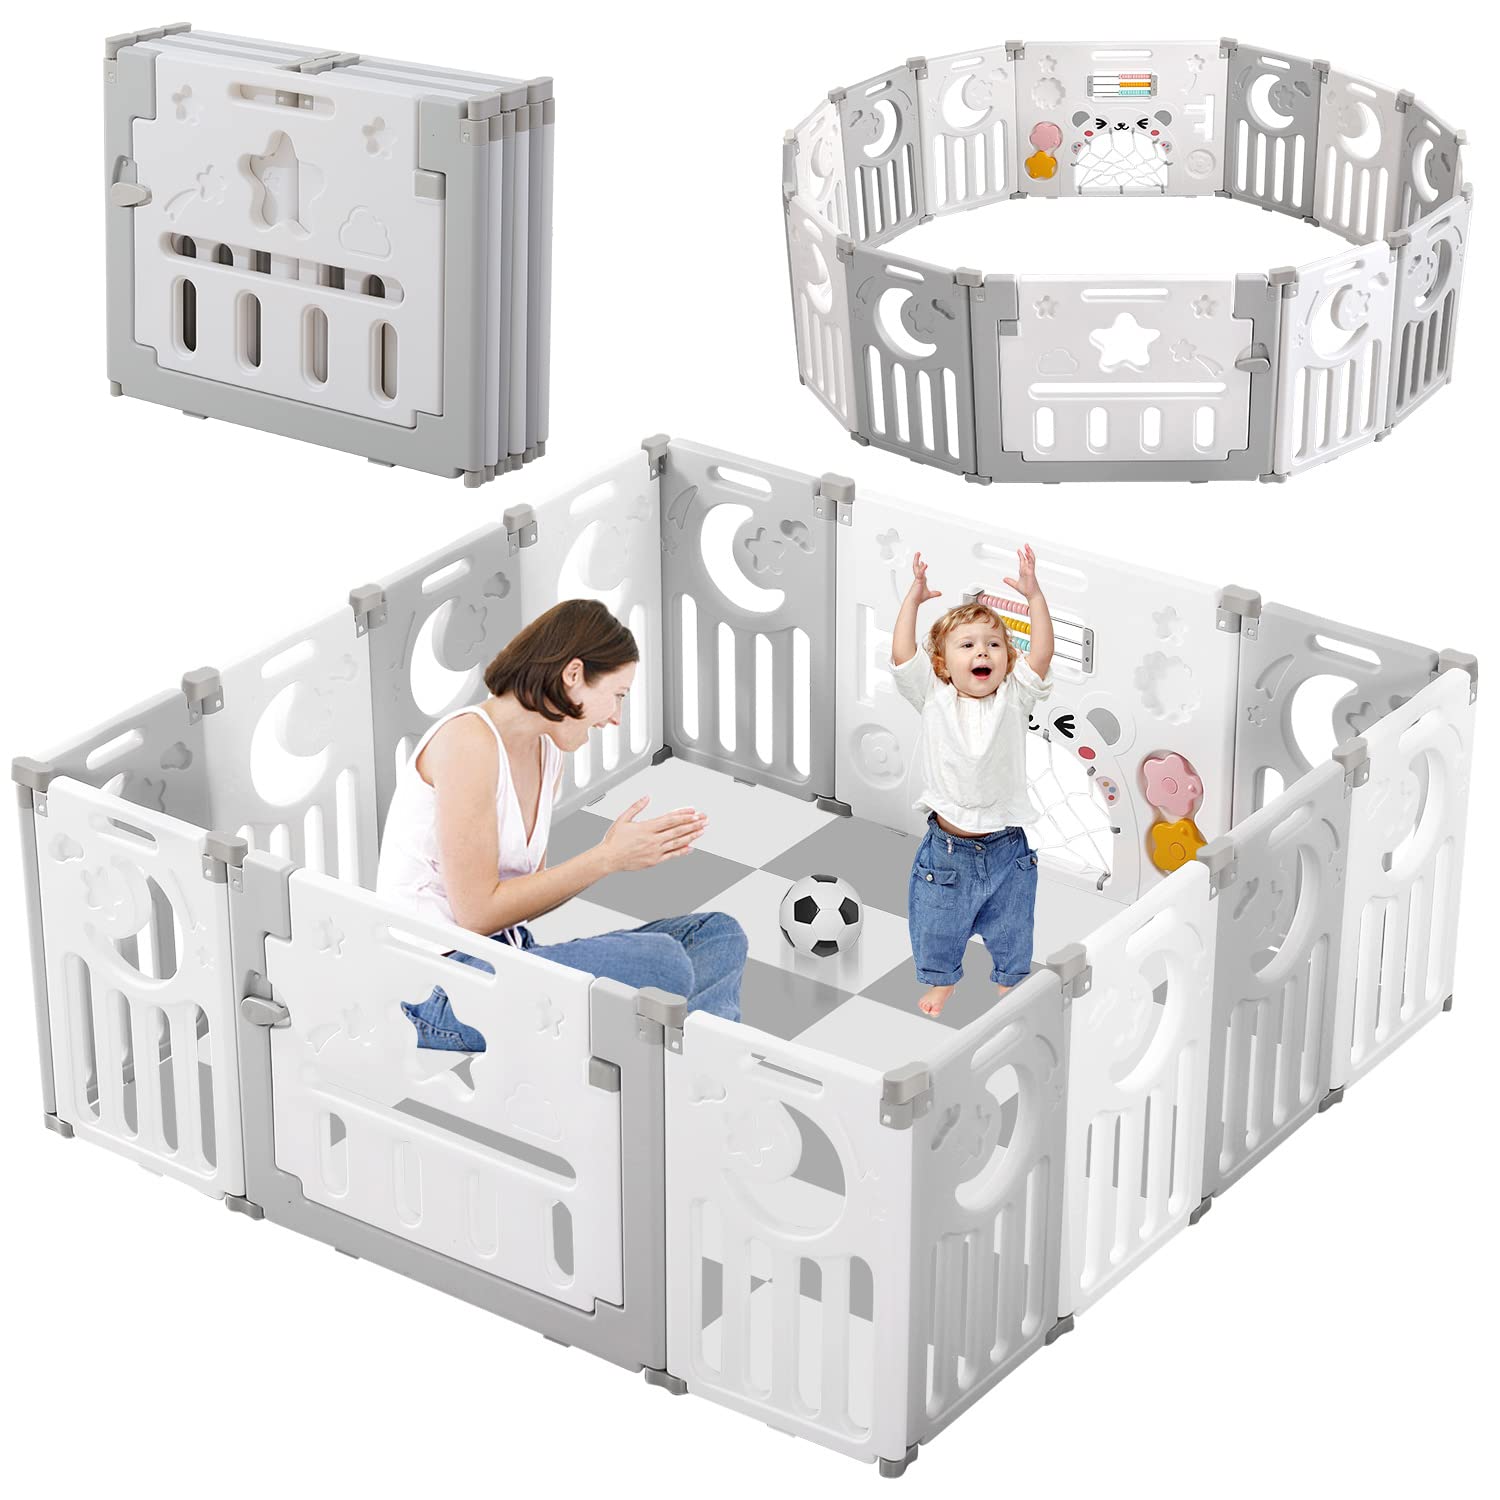 Baby Playpen Dripex Upgrade Foldable 14 Panel Grey White 54% Off Now At $129.99